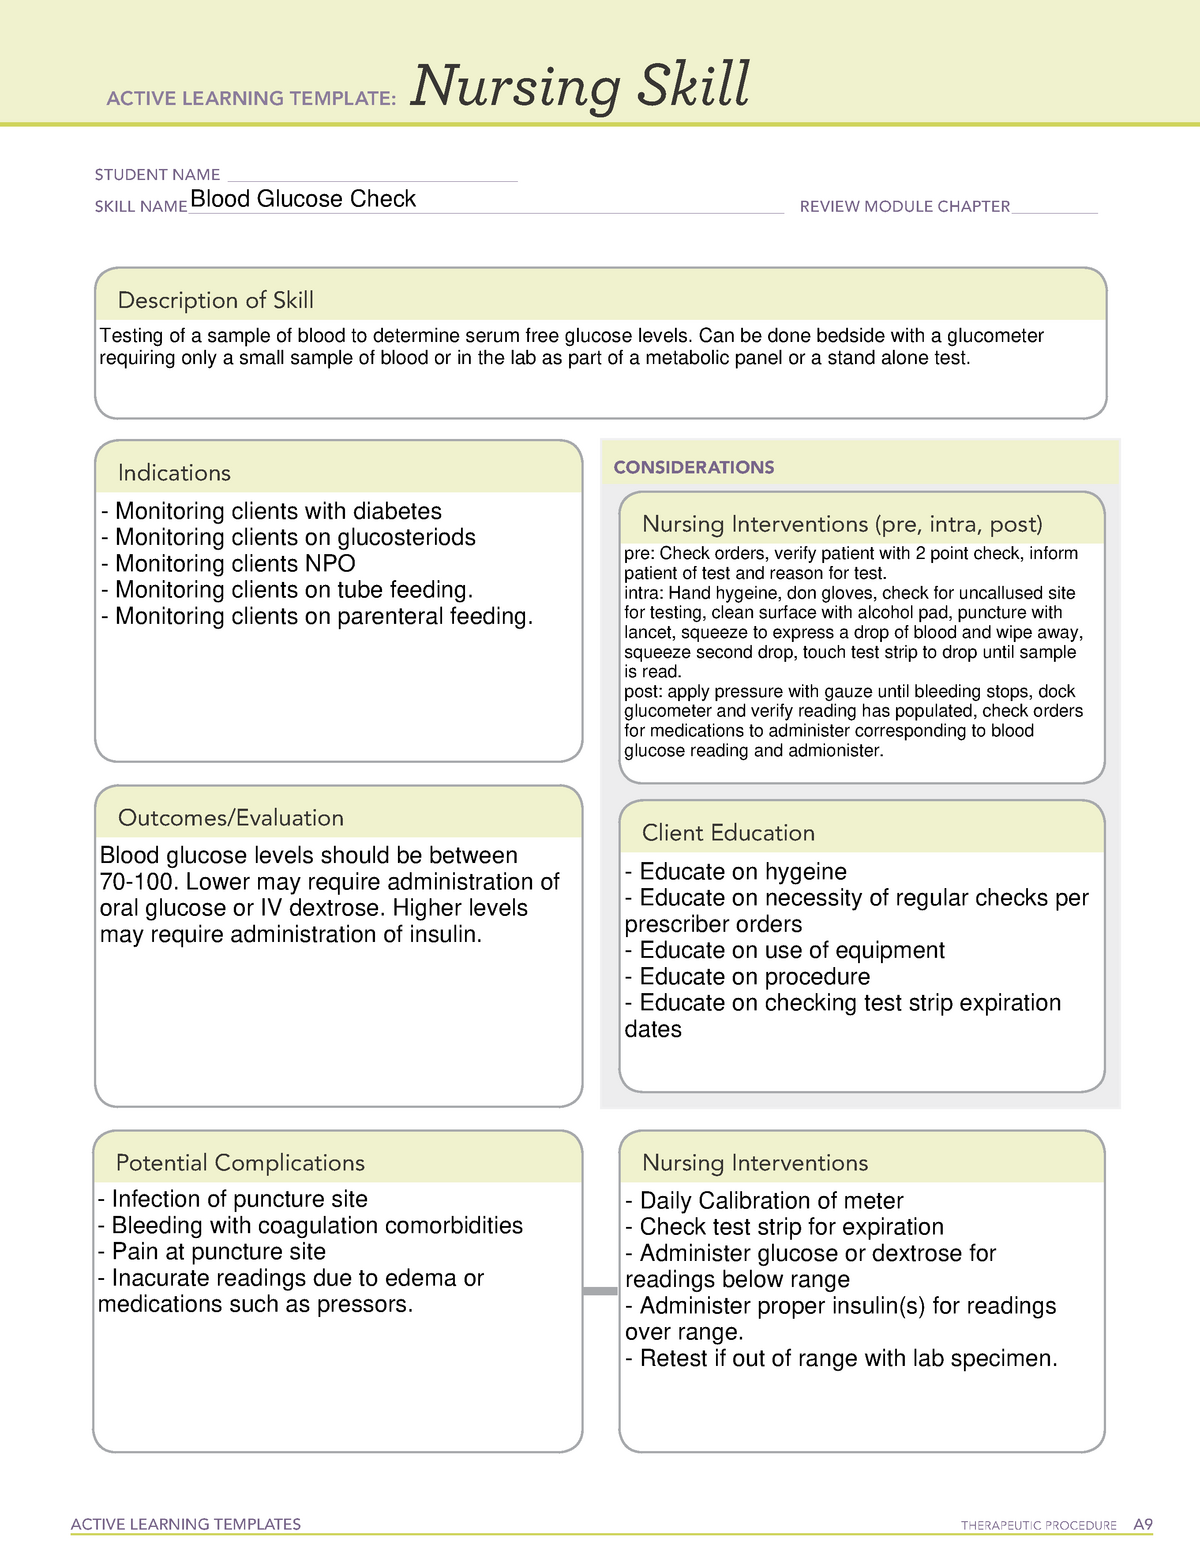 blood-glucose-check-nursing-skill-template-active-learning-templates